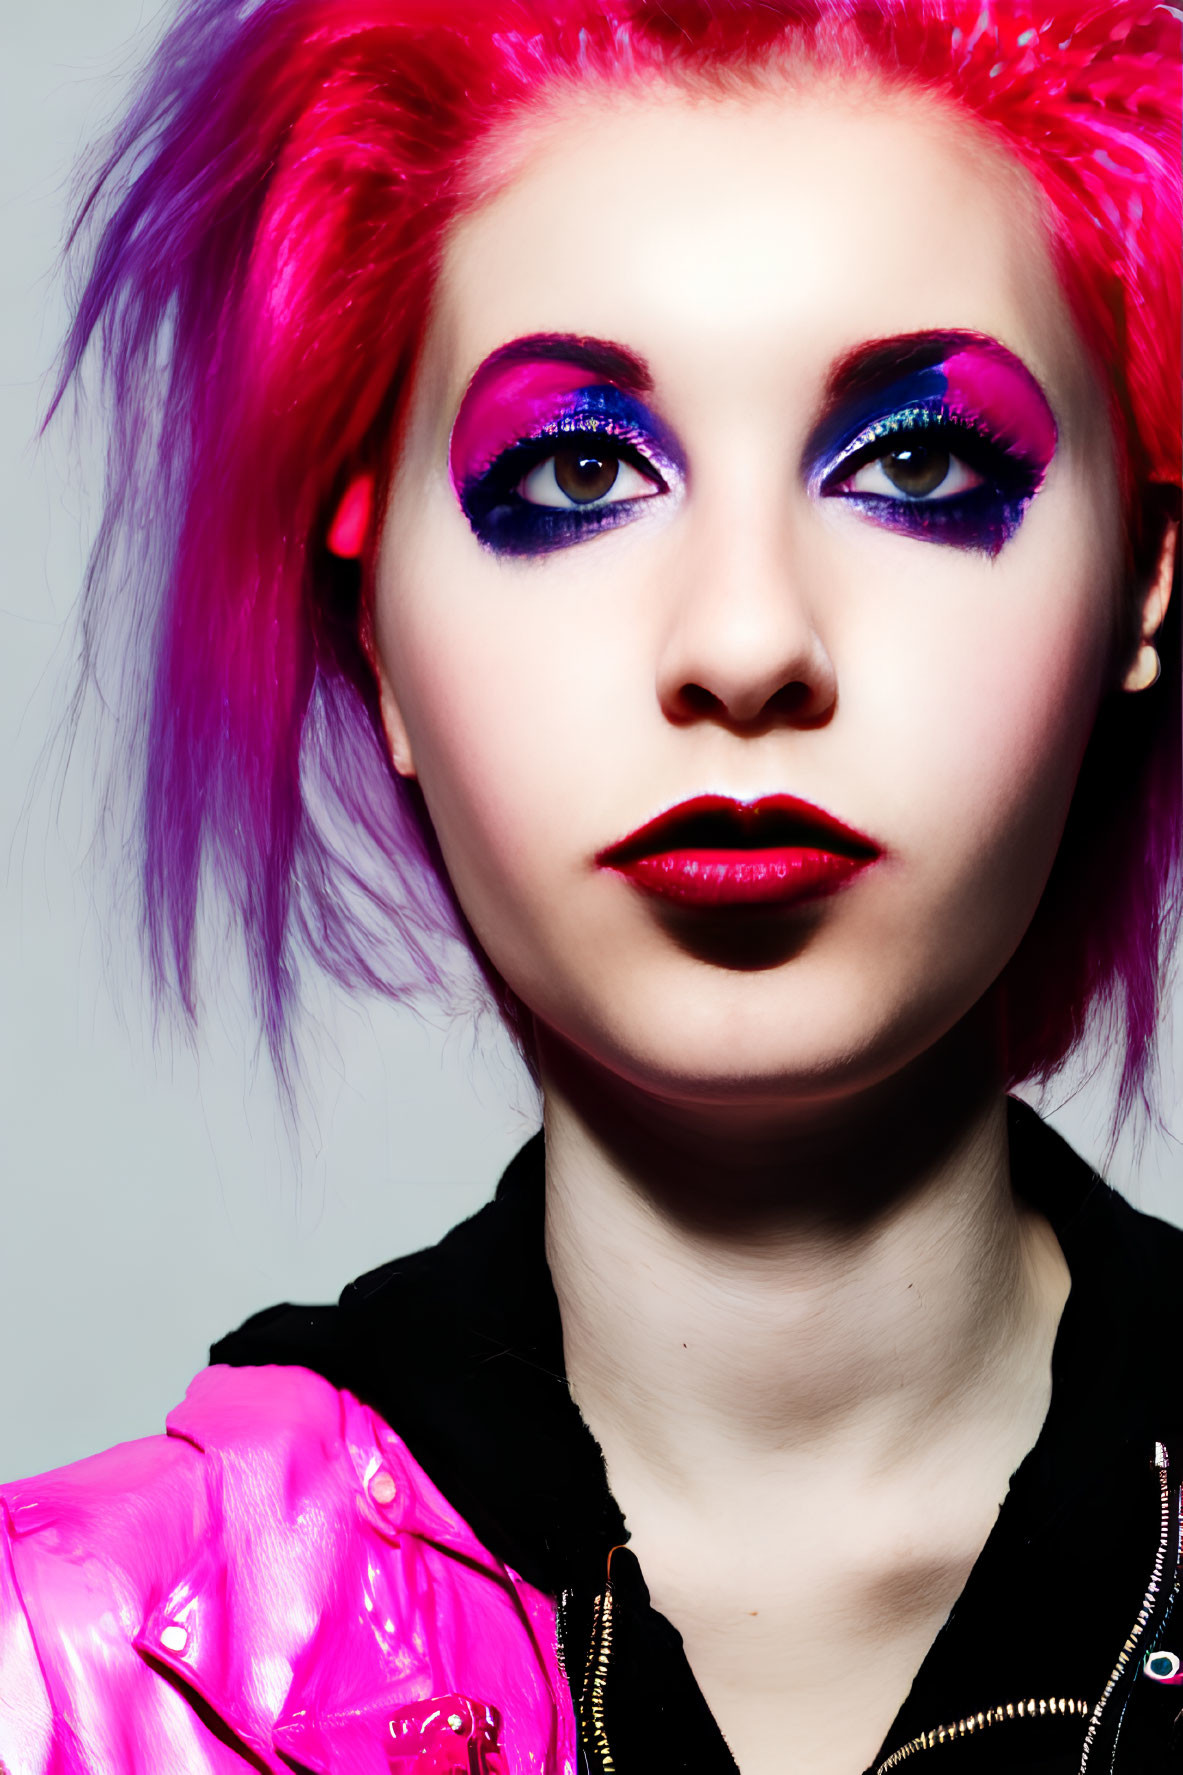 Vibrant pink hair woman with bold purple eye makeup in glossy pink jacket